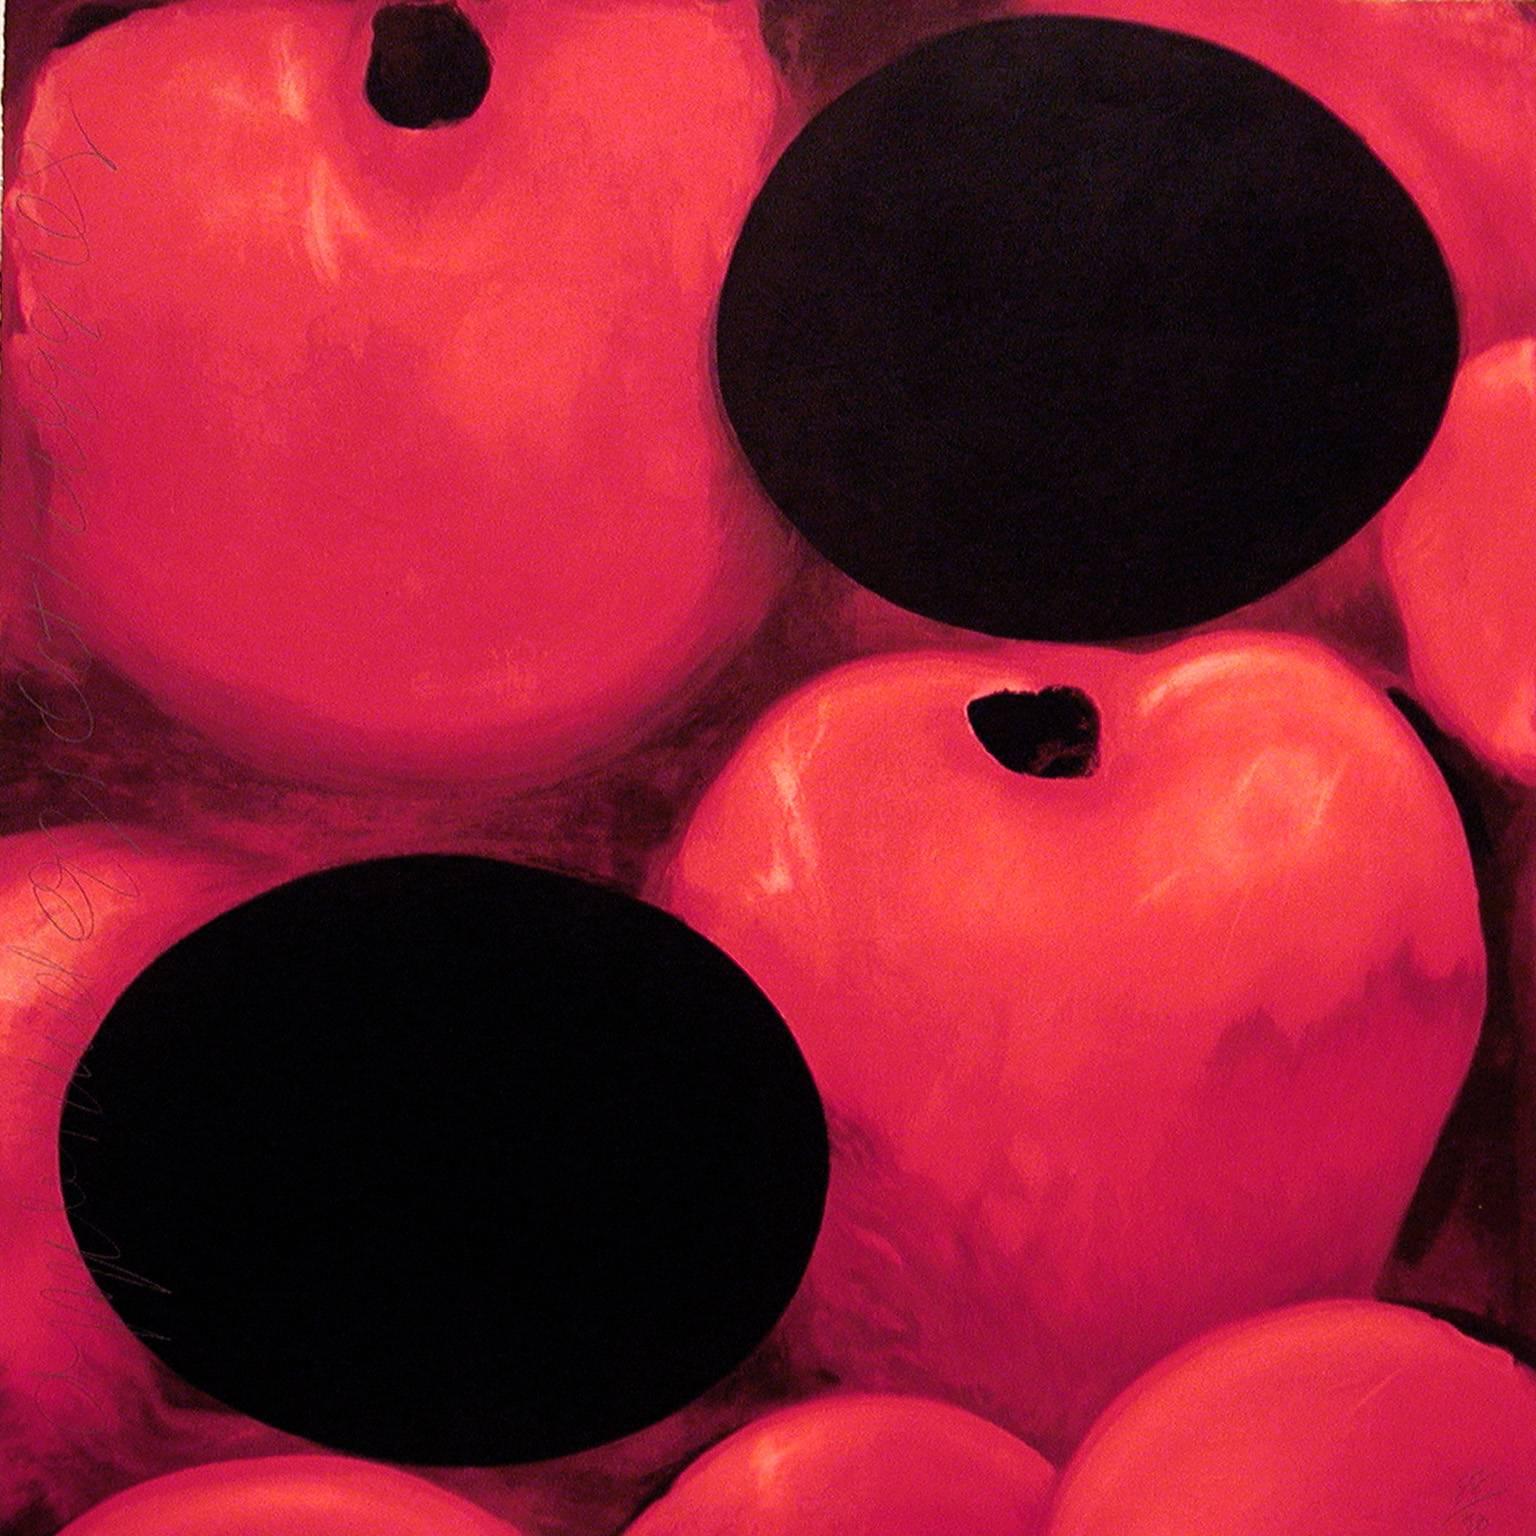 Donald Sultan Still-Life Print - Apples and Eggs October 12, 1999